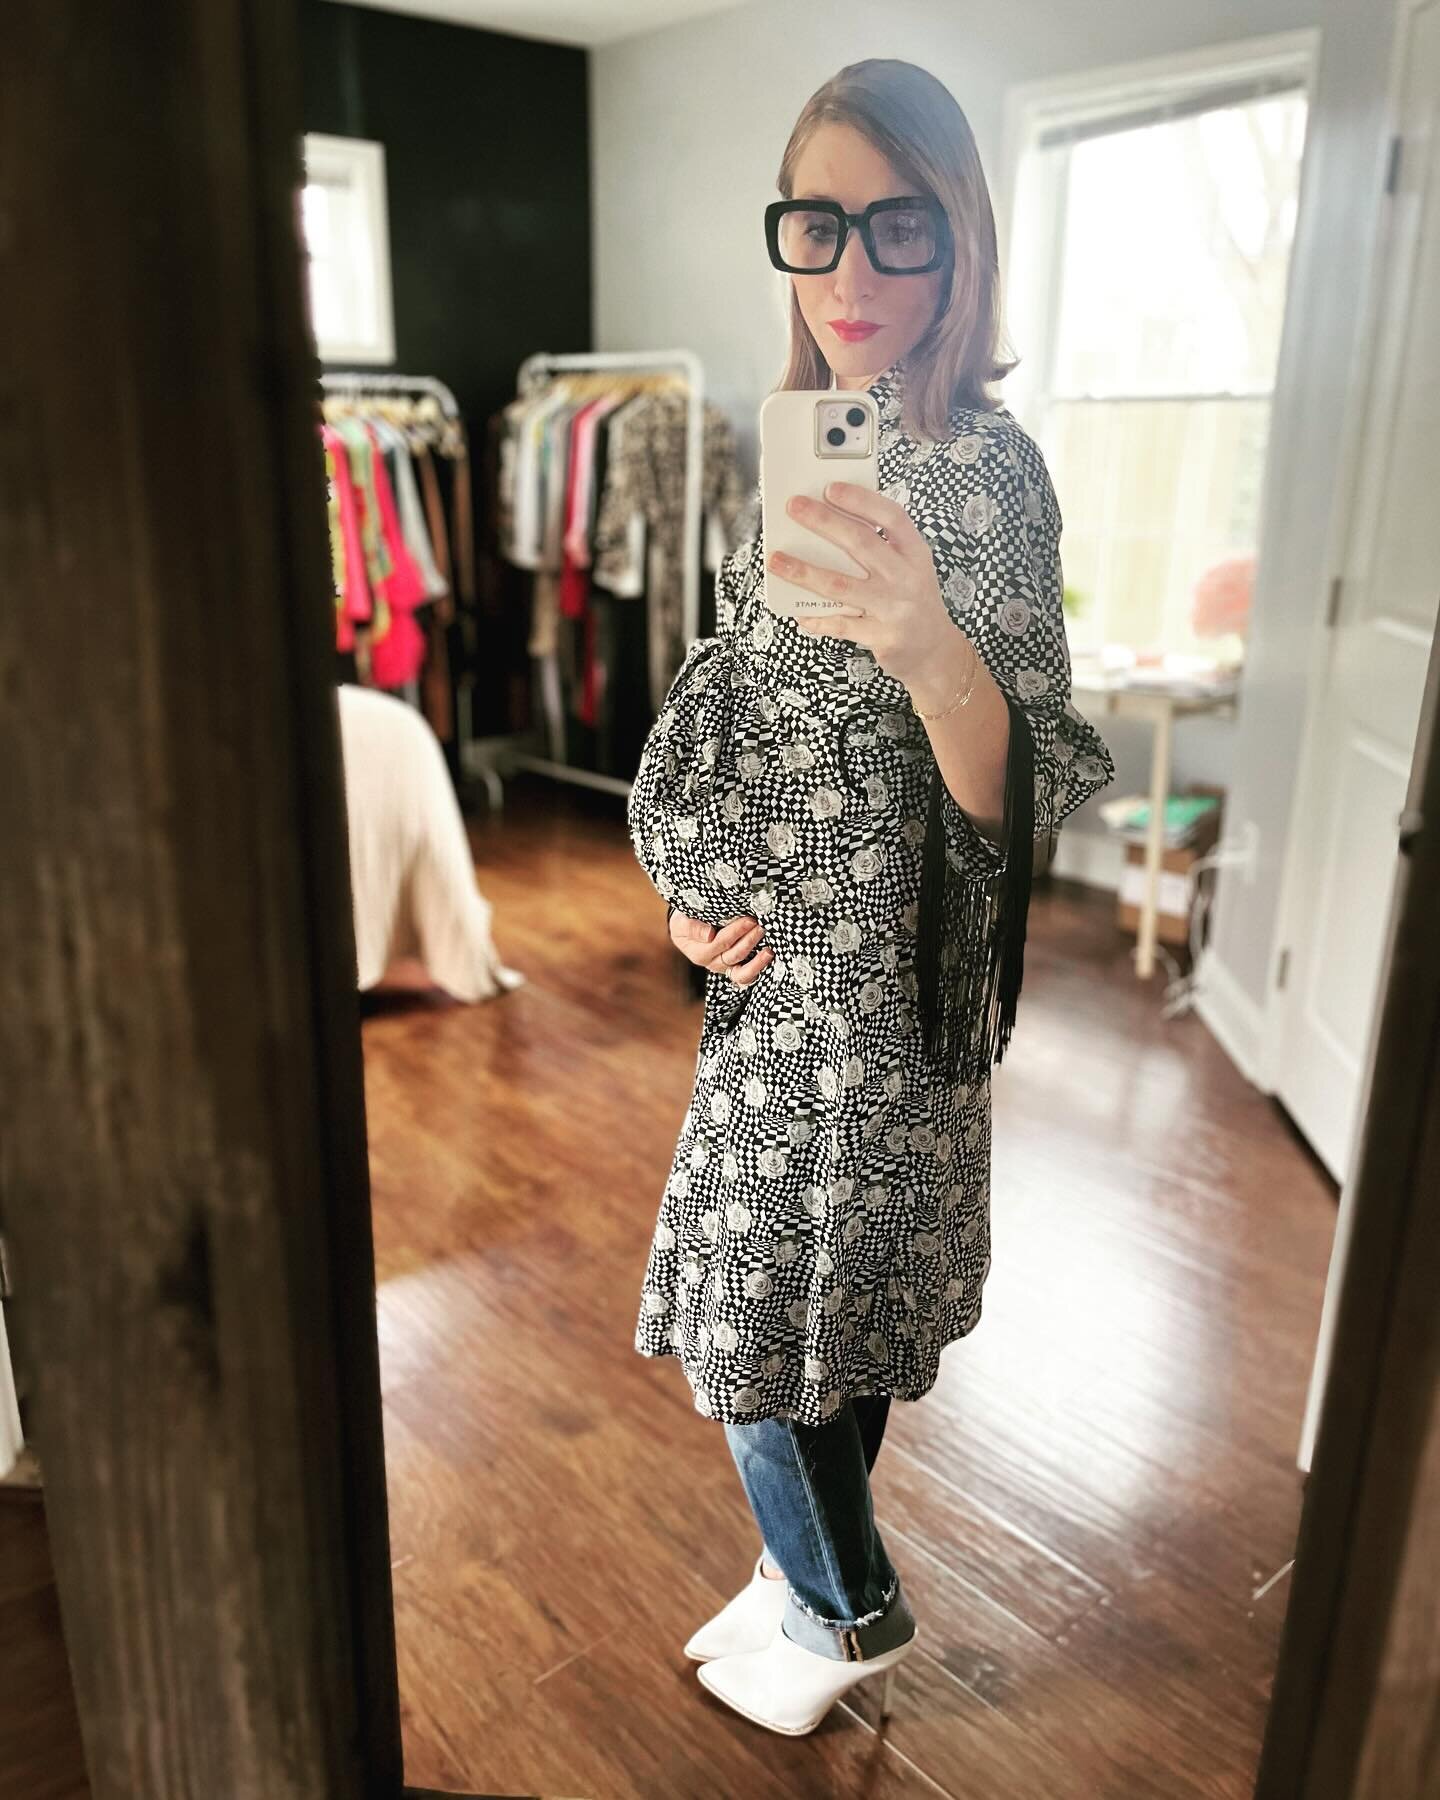 VALT robes are also&hellip;MATERNITY robes 🤰🏼